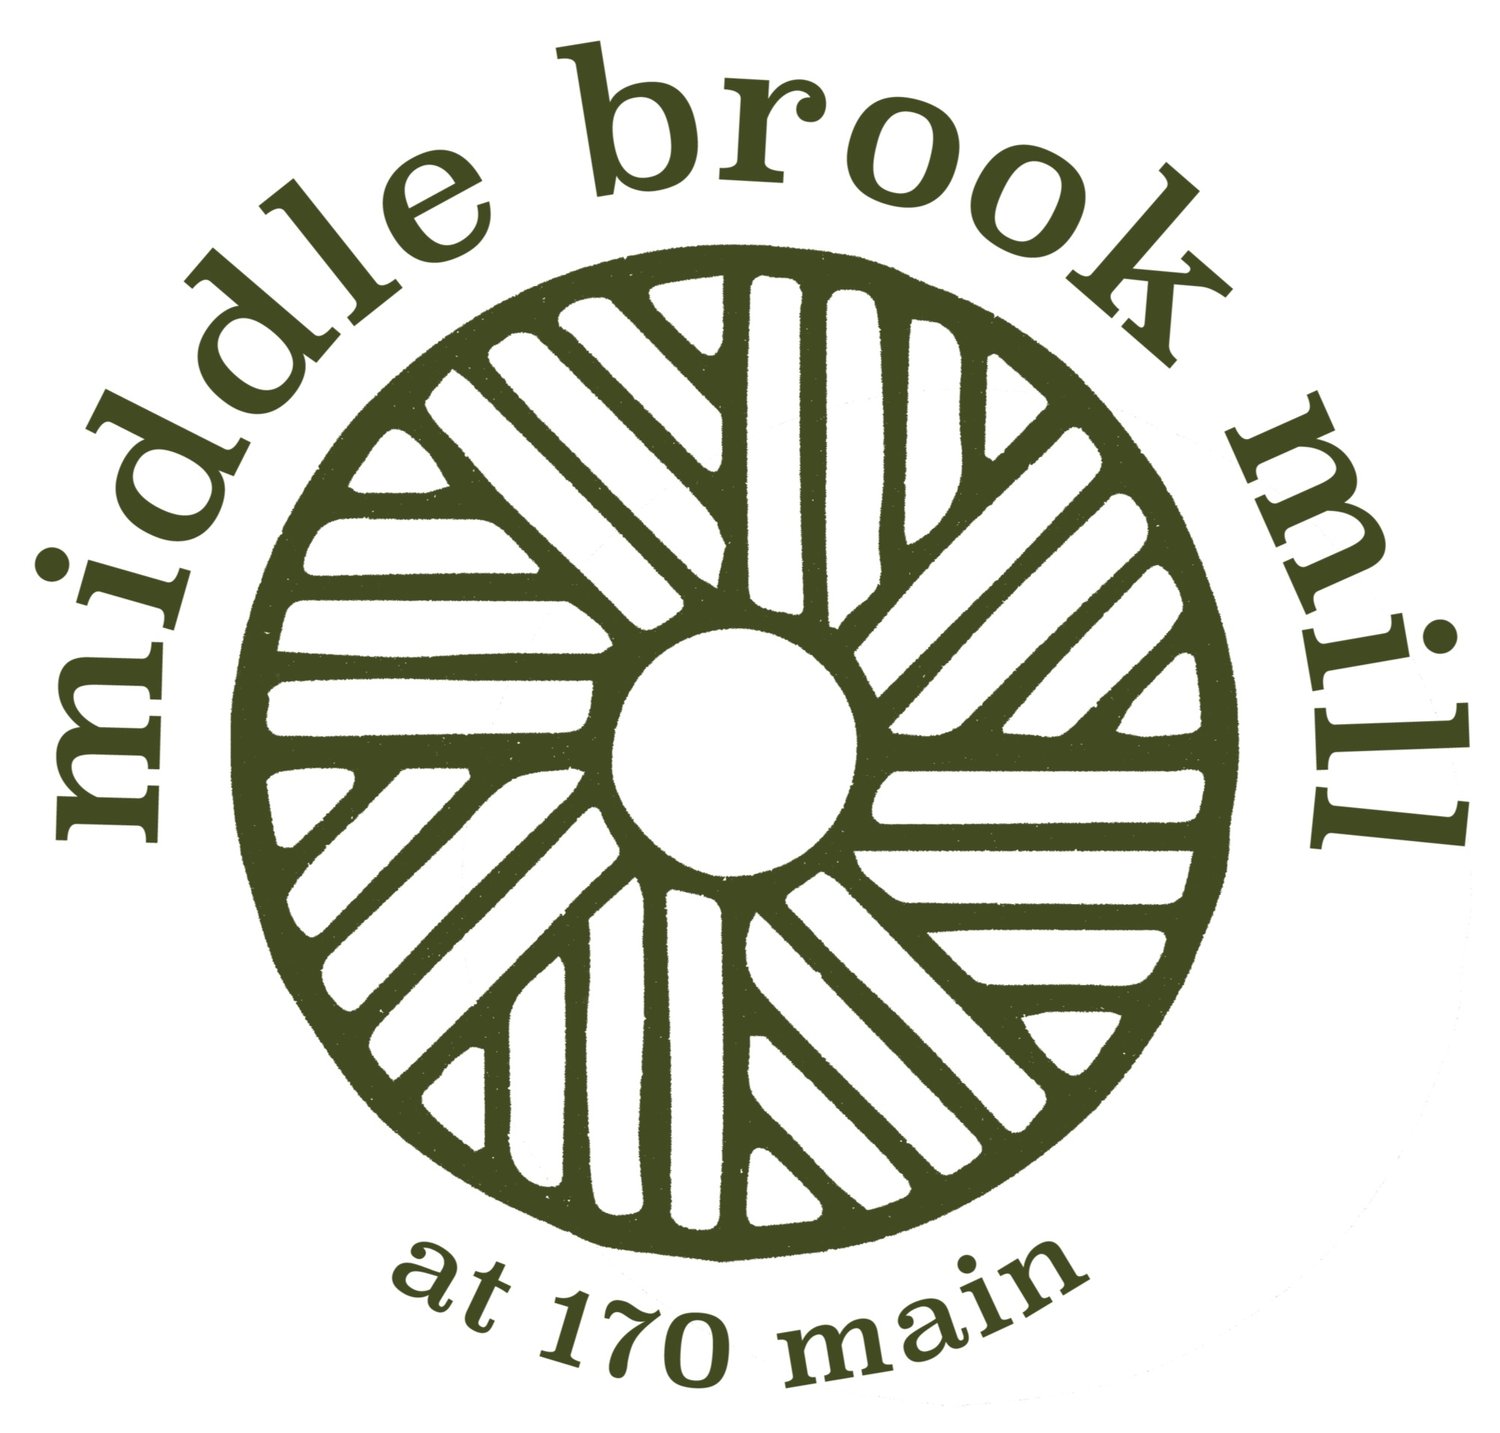 Middle Brook Mill at 170 Main